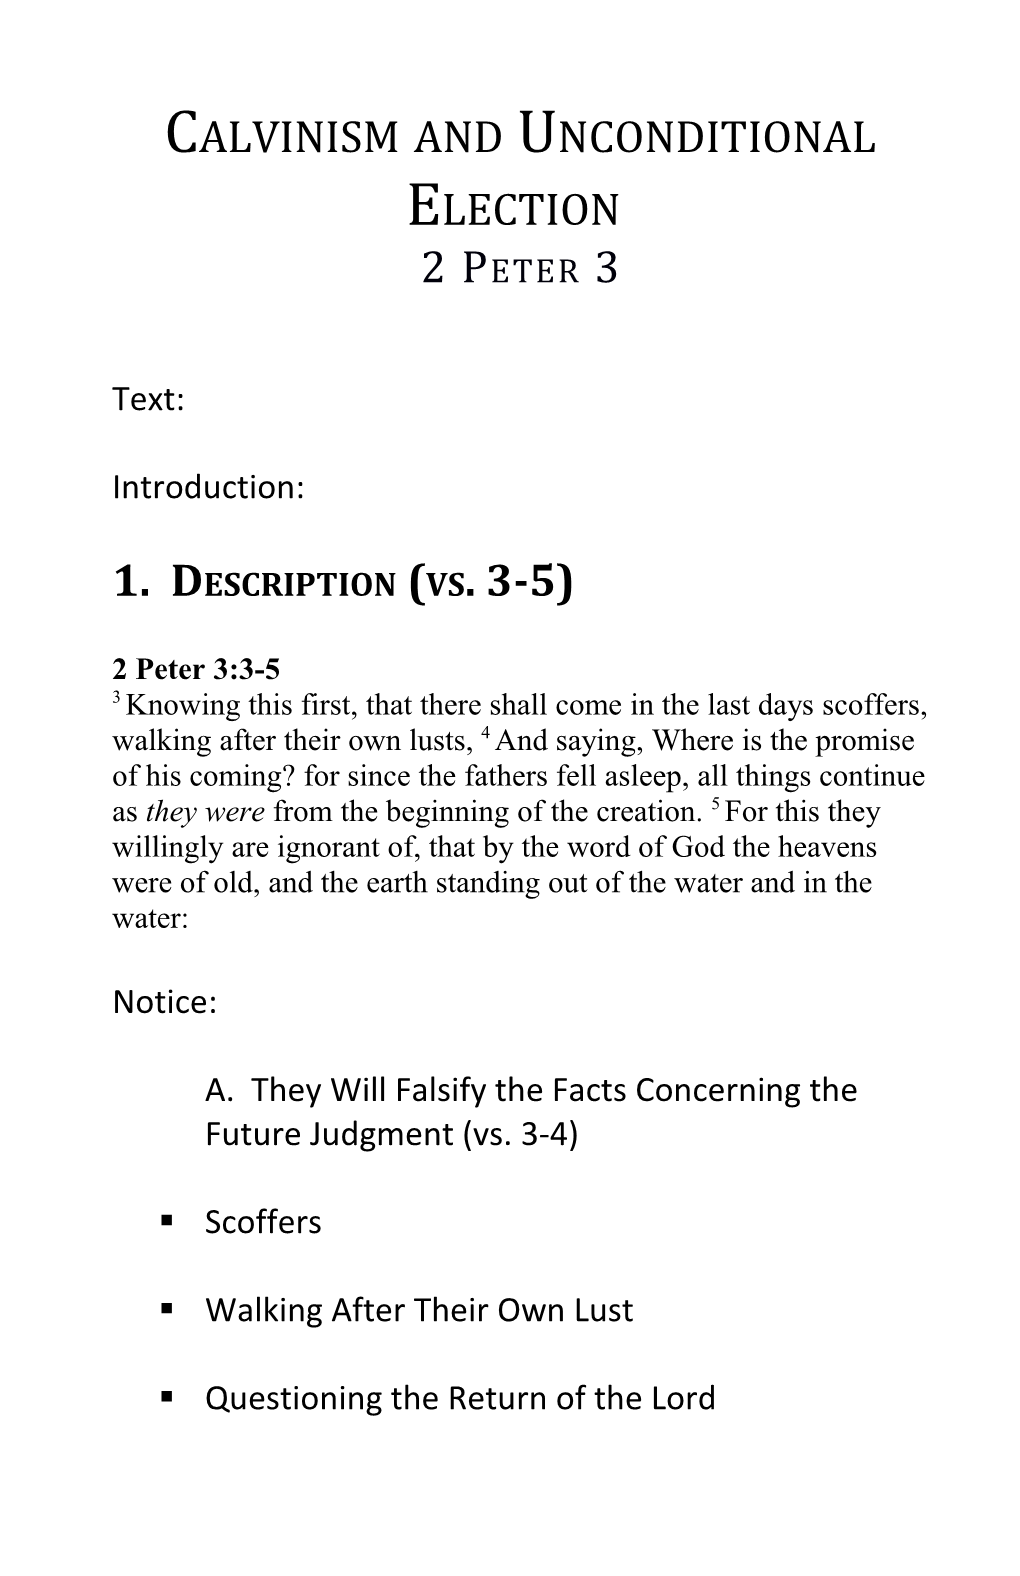 A. They Will Falsify the Facts Concerning the Future Judgment (Vs. 3-4)